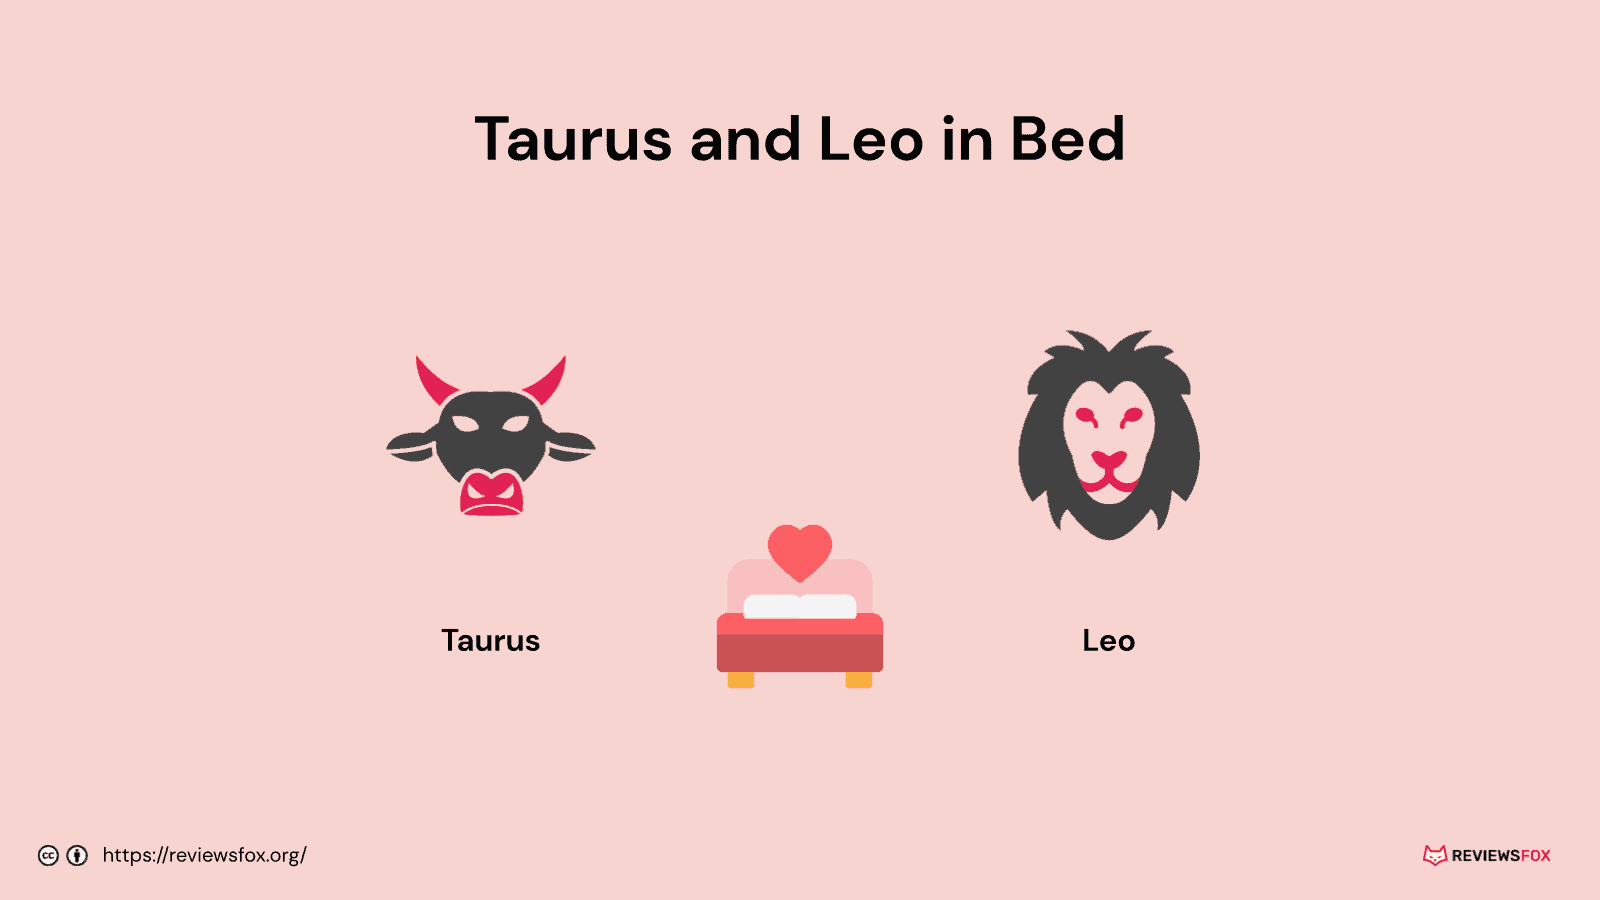 Taurus and Leo in bed